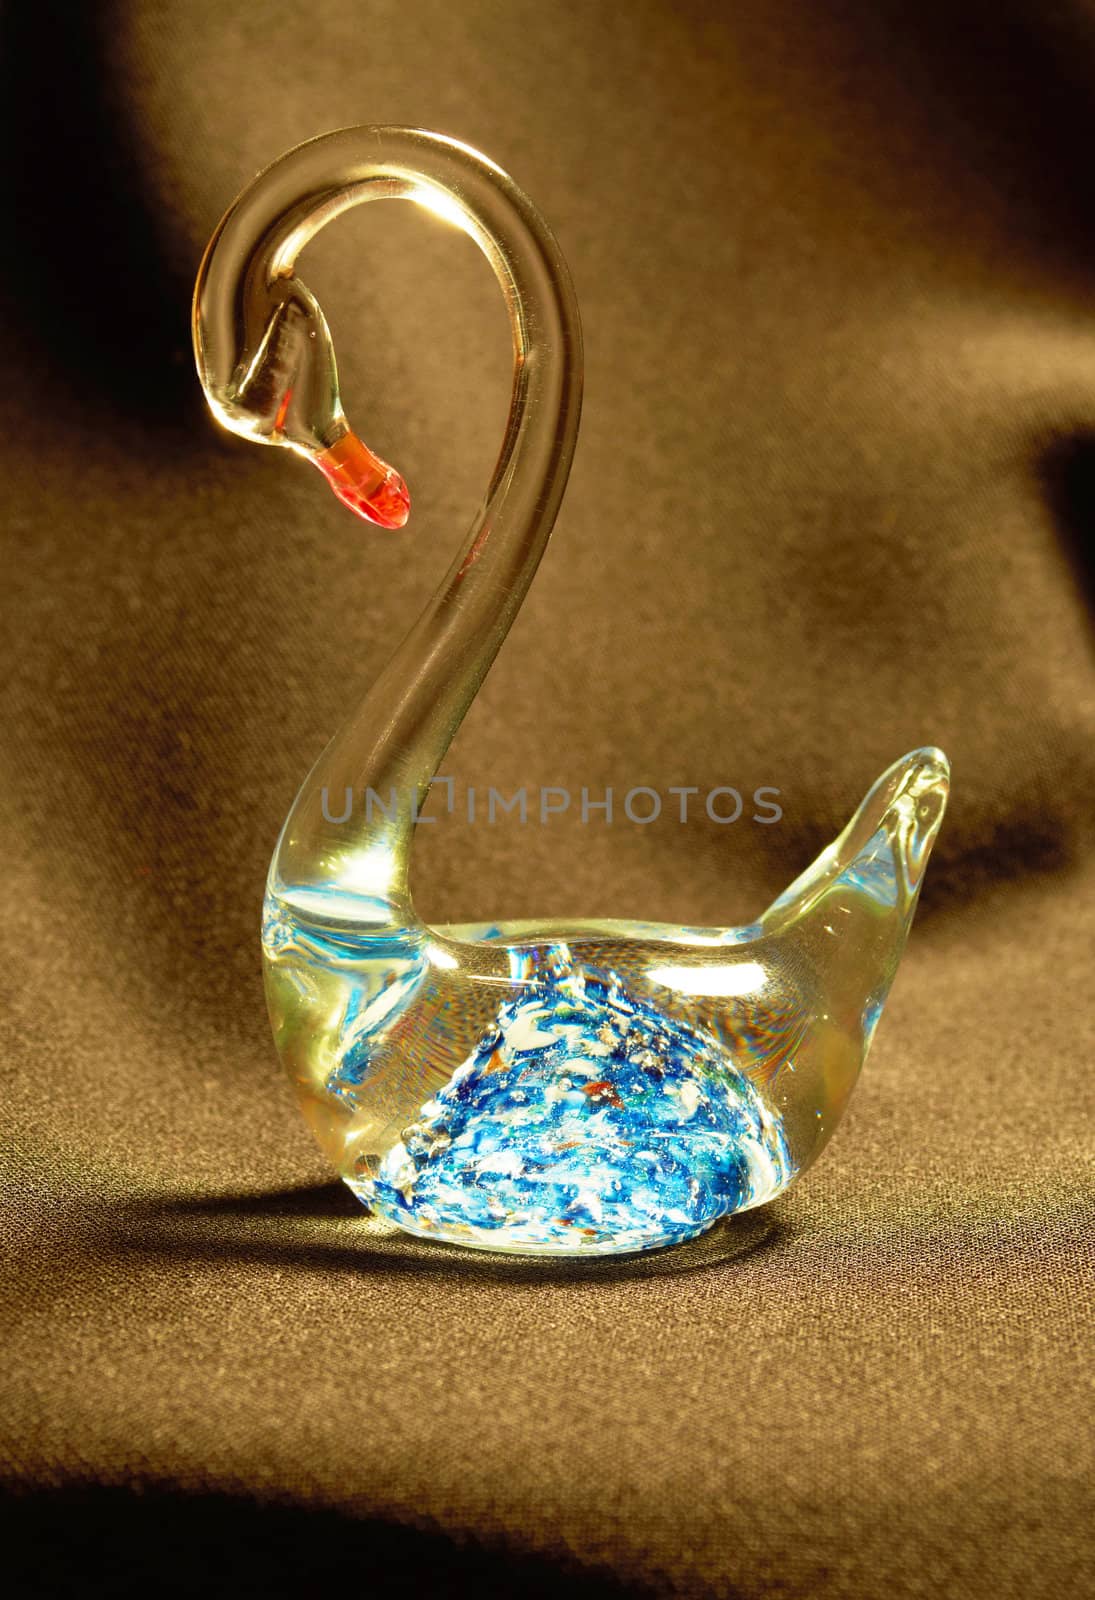 Figurine glass swan with a bright blue pattern on a black background